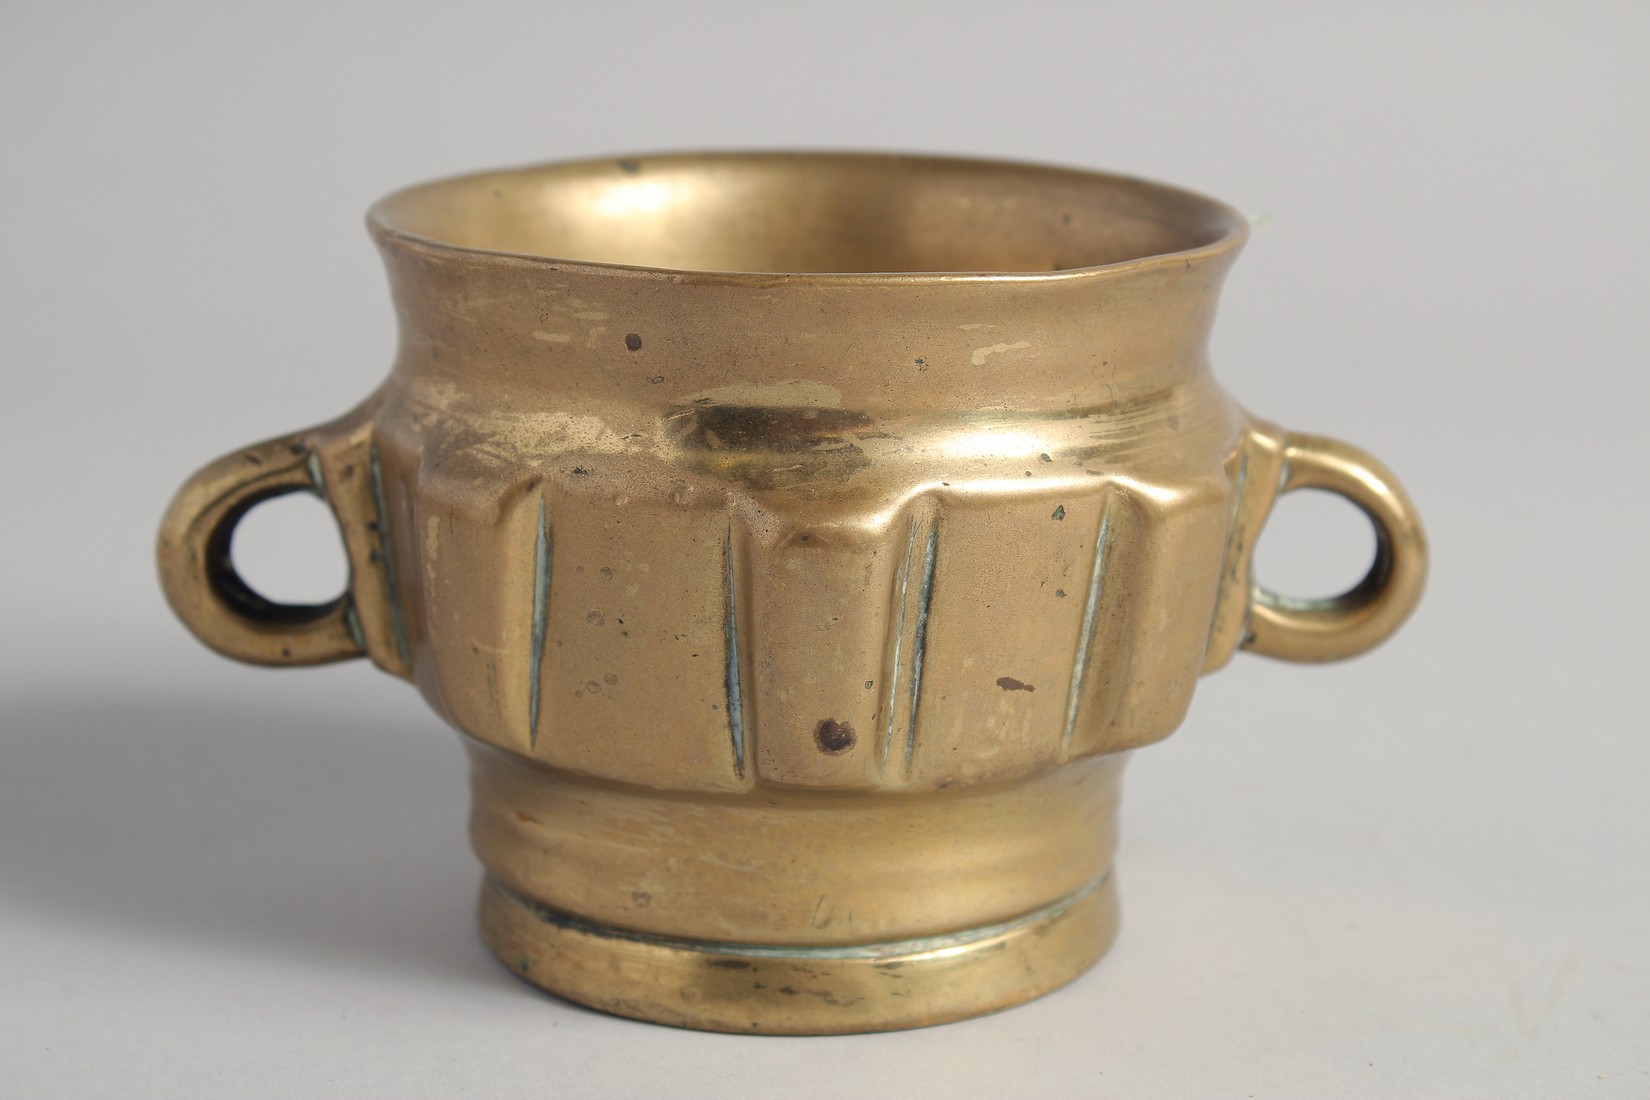 A 14TH/15TH CENTURY HISPANO MORESQUE BRASS MORTAR, with twin handles, 15cm wide (handle to handle). - Image 3 of 6